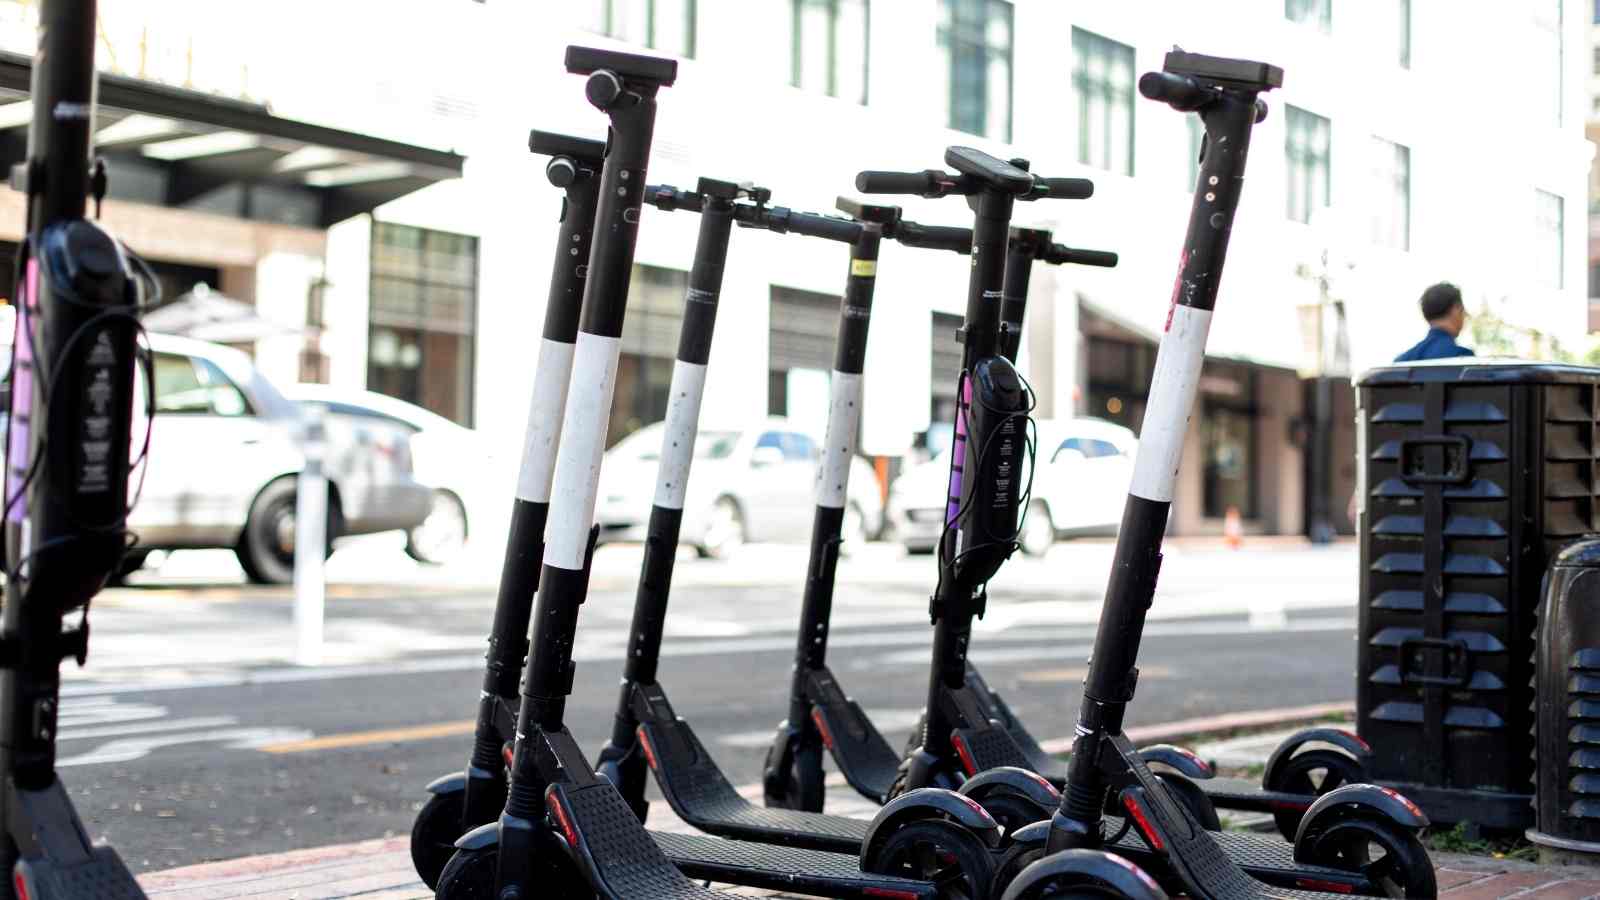 Electric Scooters in USA